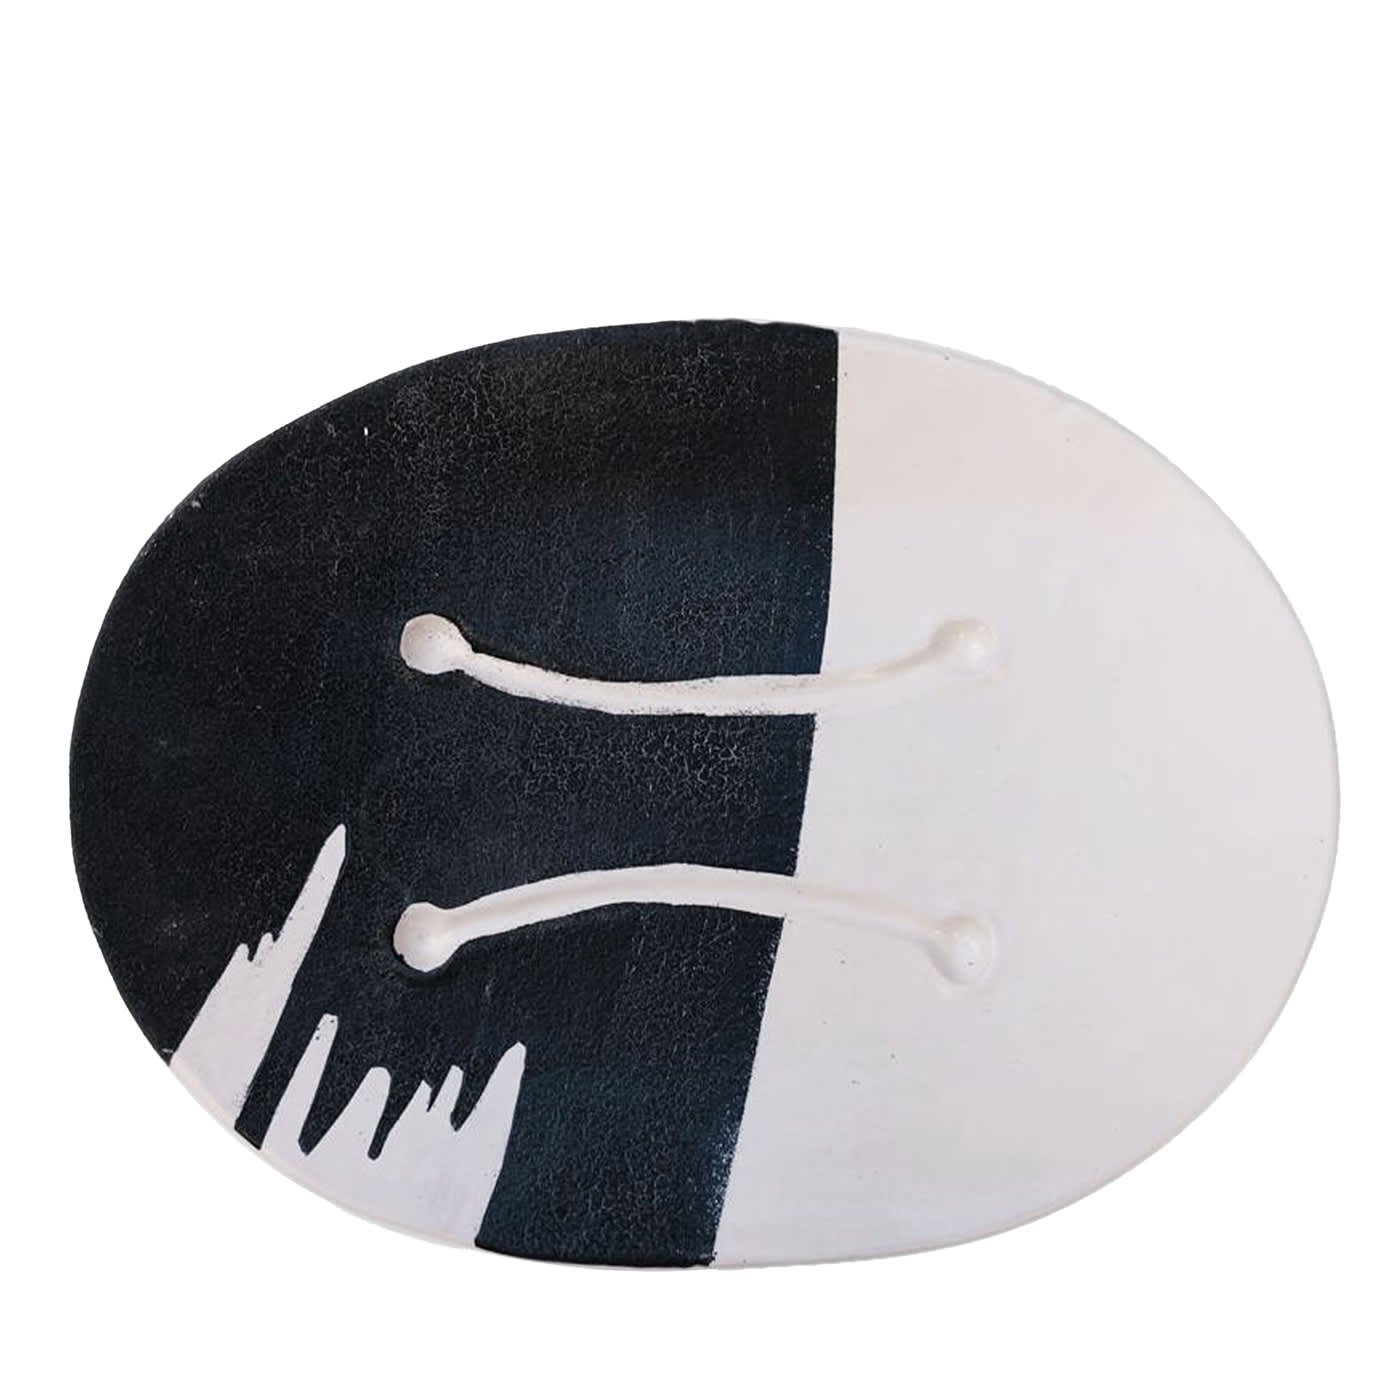 Black and White Idyllium Large Serving Plate by Nigel Coates - The Art & Design Group